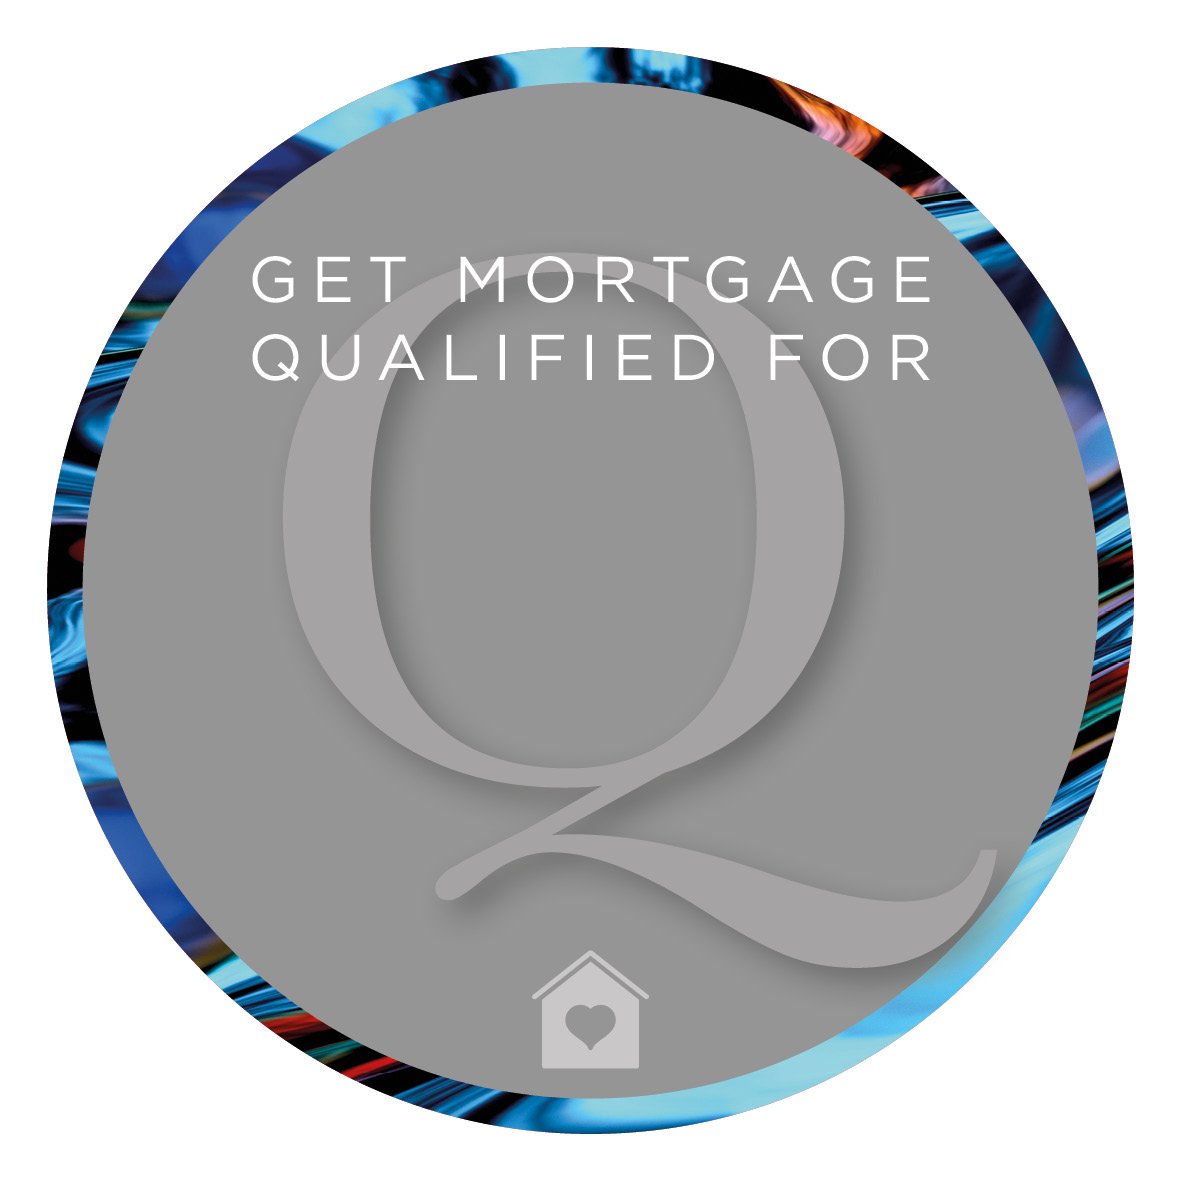 Get Mortgage Qualified at CQ2.jpg